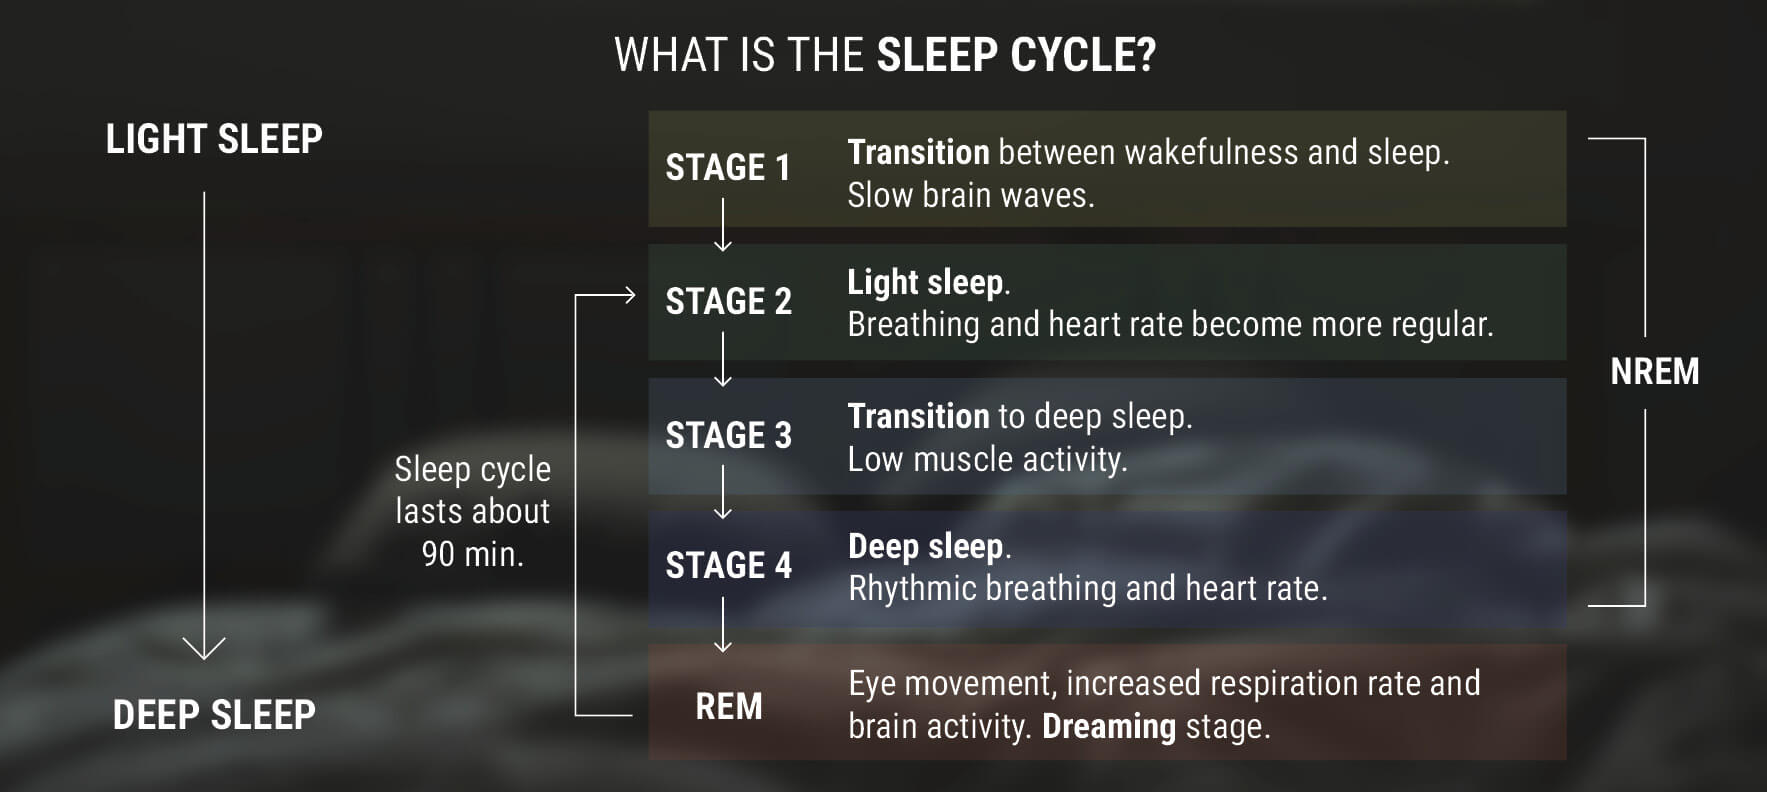 What Is The Sleep Cycle?